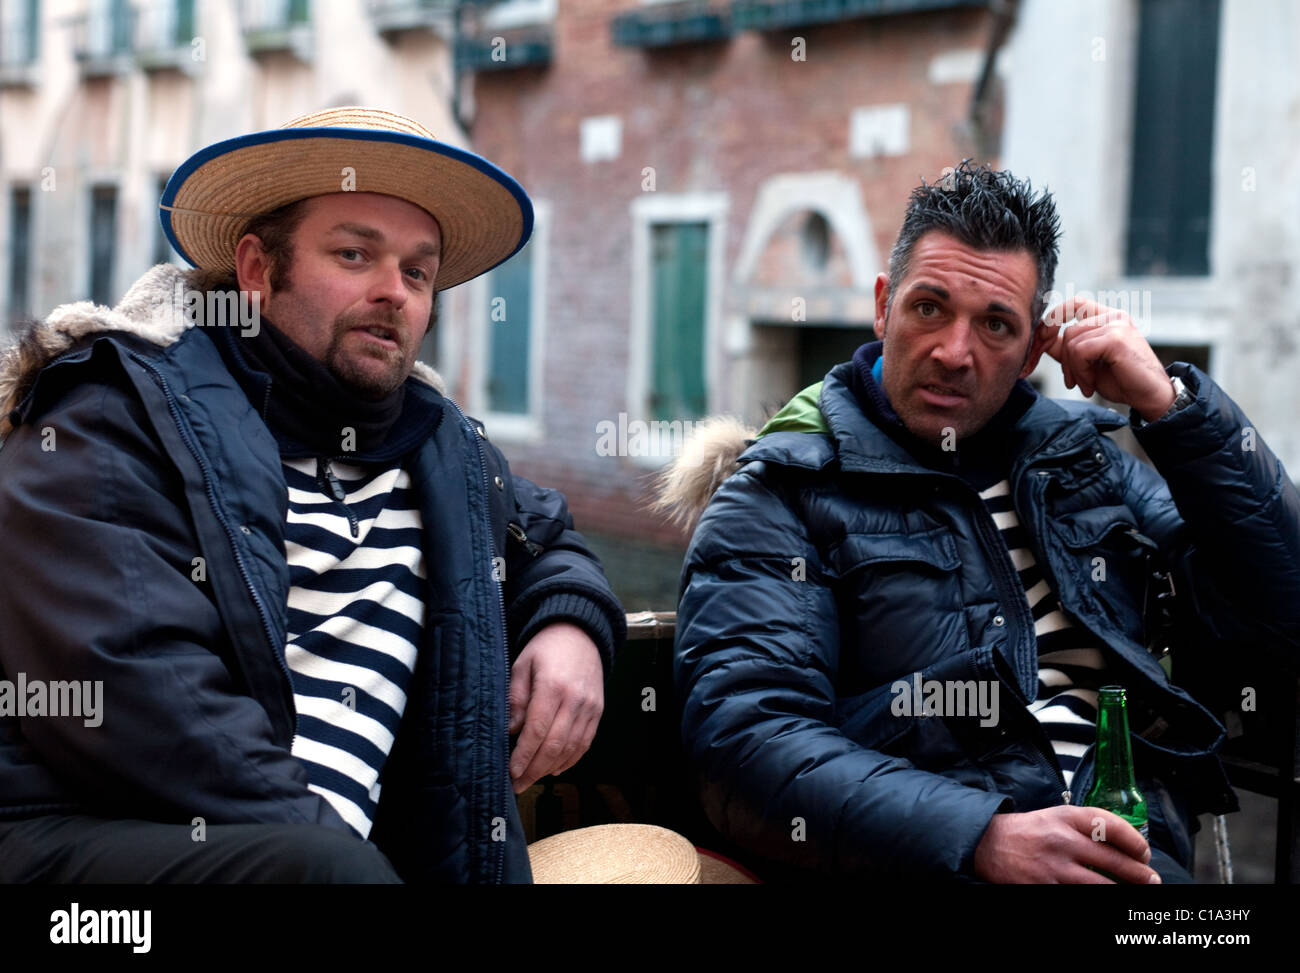 Two gondoliers awaiting customers, Venice, Italy Stock Photo